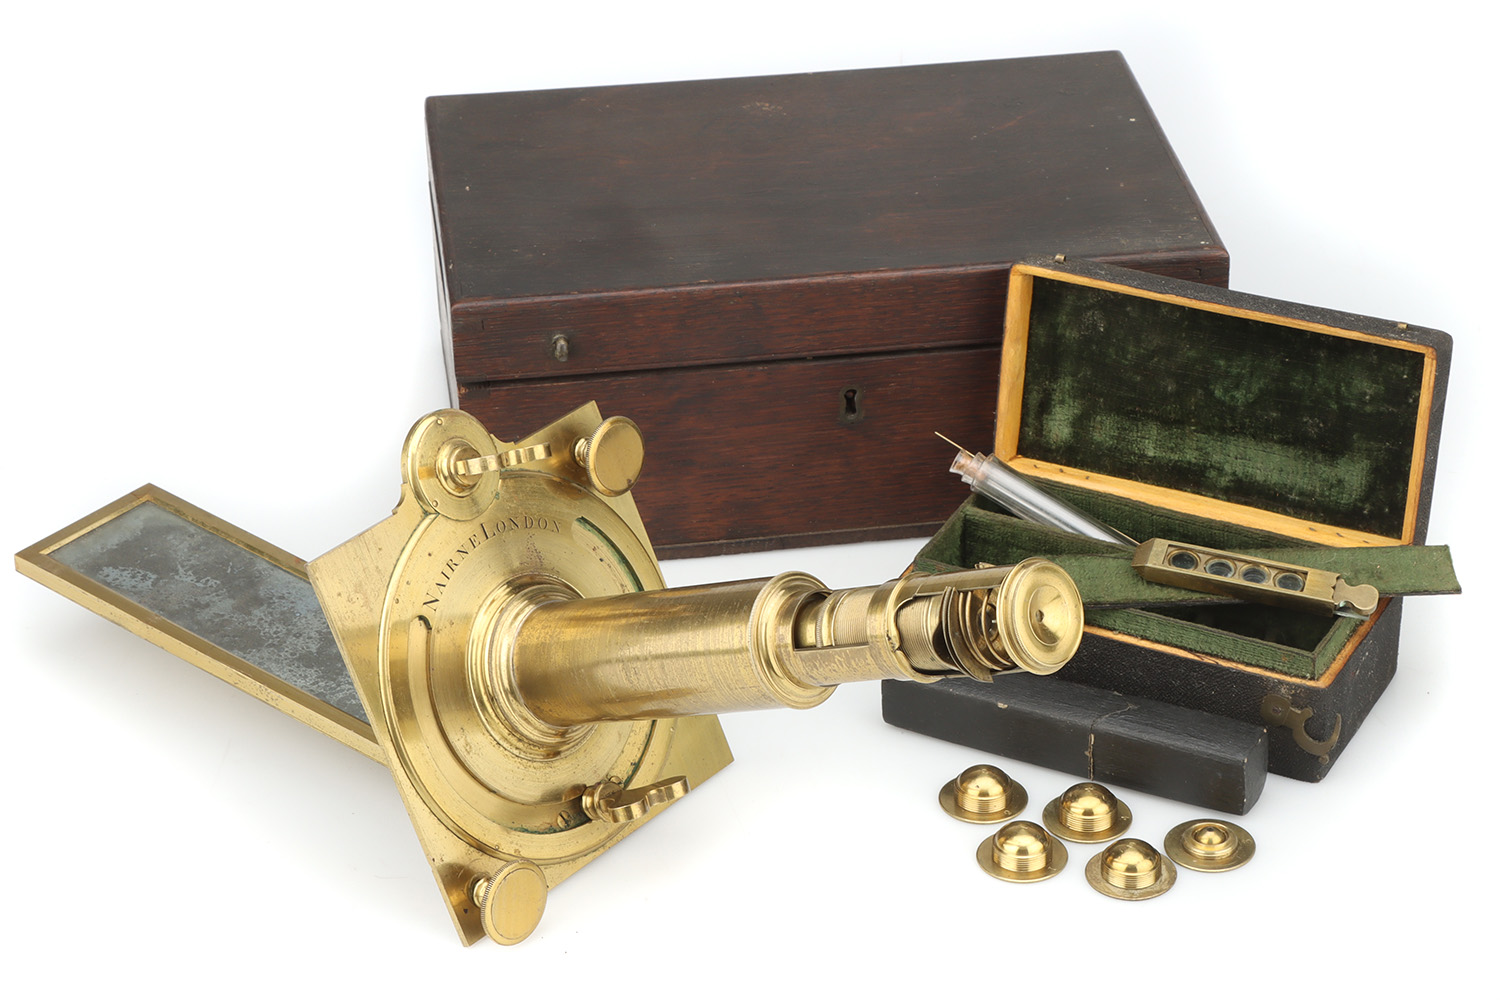 A Very Fine 18th Century Solar Microscope Compendium By Nairne, London